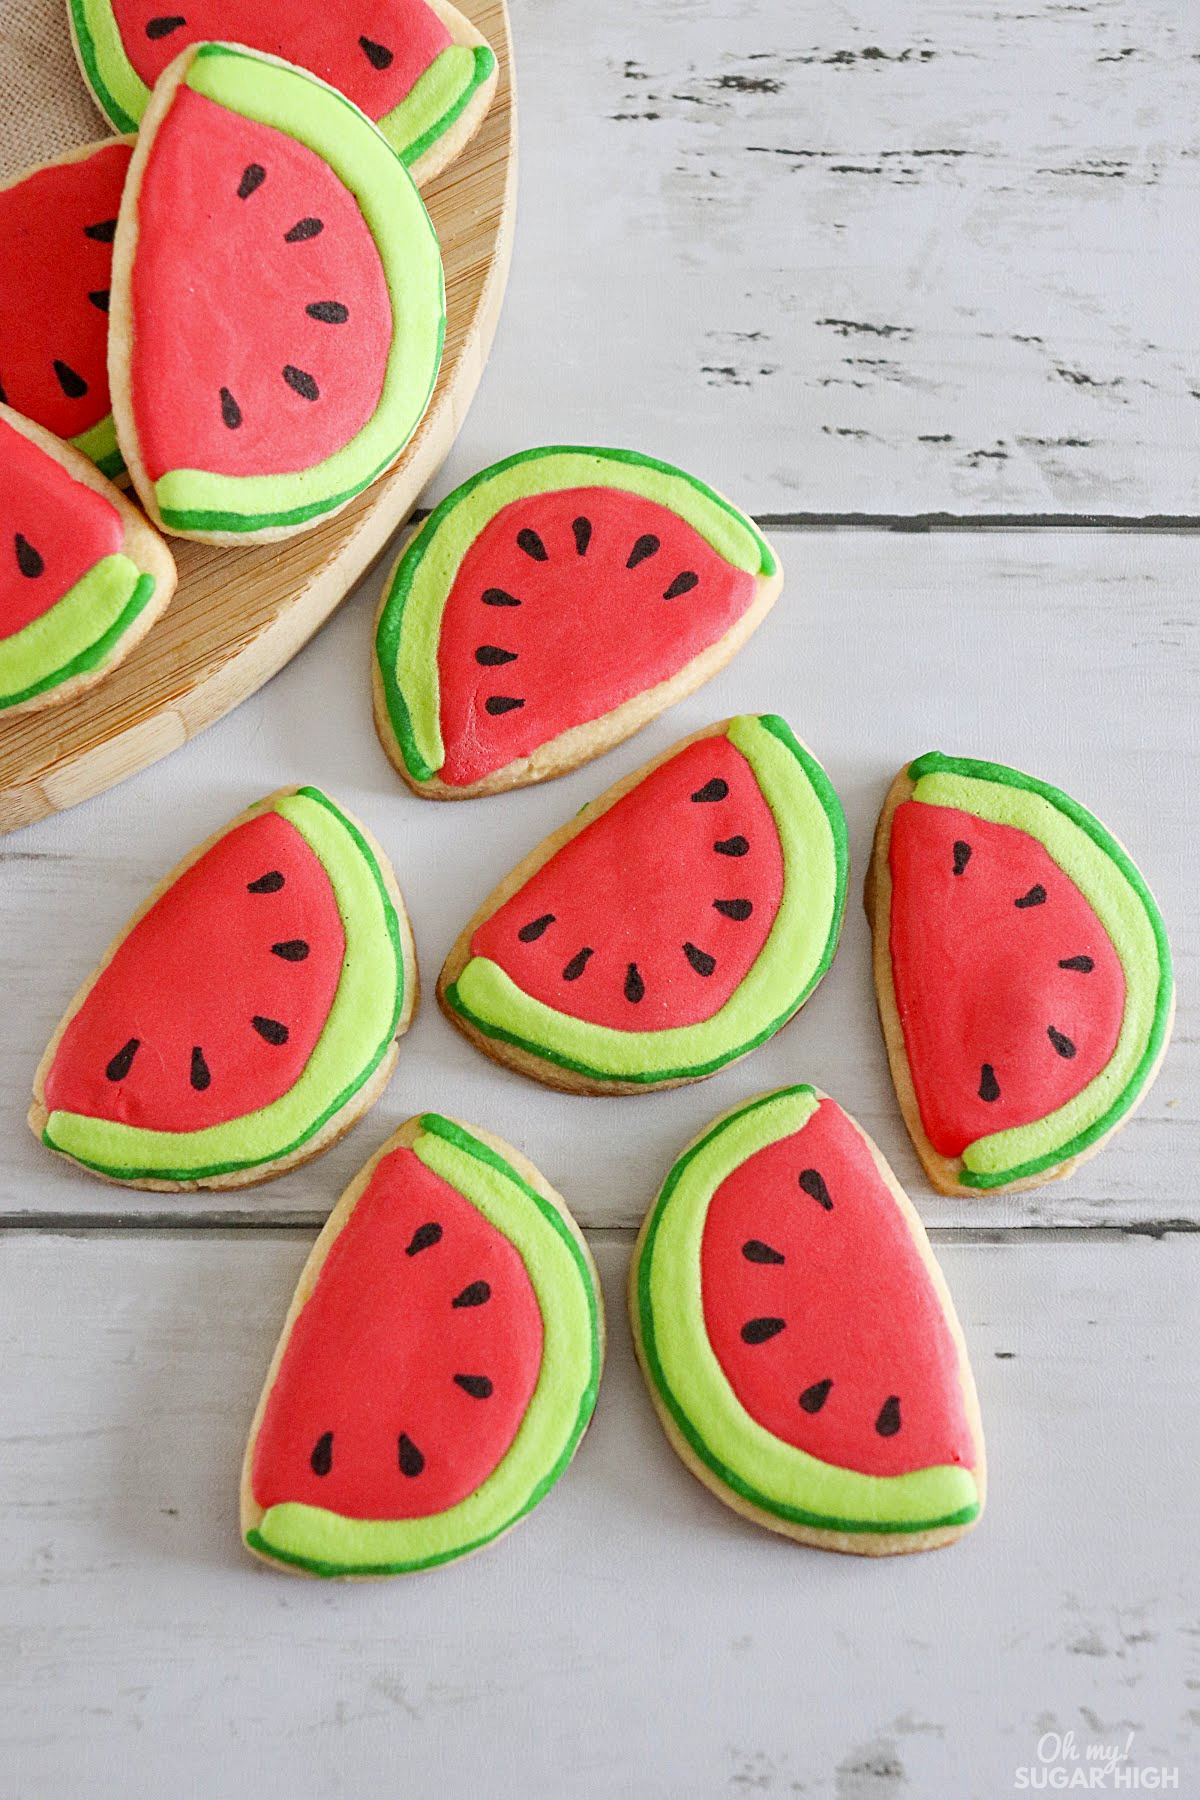 These fun watermelon sugar cookies are perfect for summer! They're sugar cookies with a royal icing watermelon design. Best of all they are easy to make and taste great, too. You can use pre-made refrigerated cookie dough for ease.